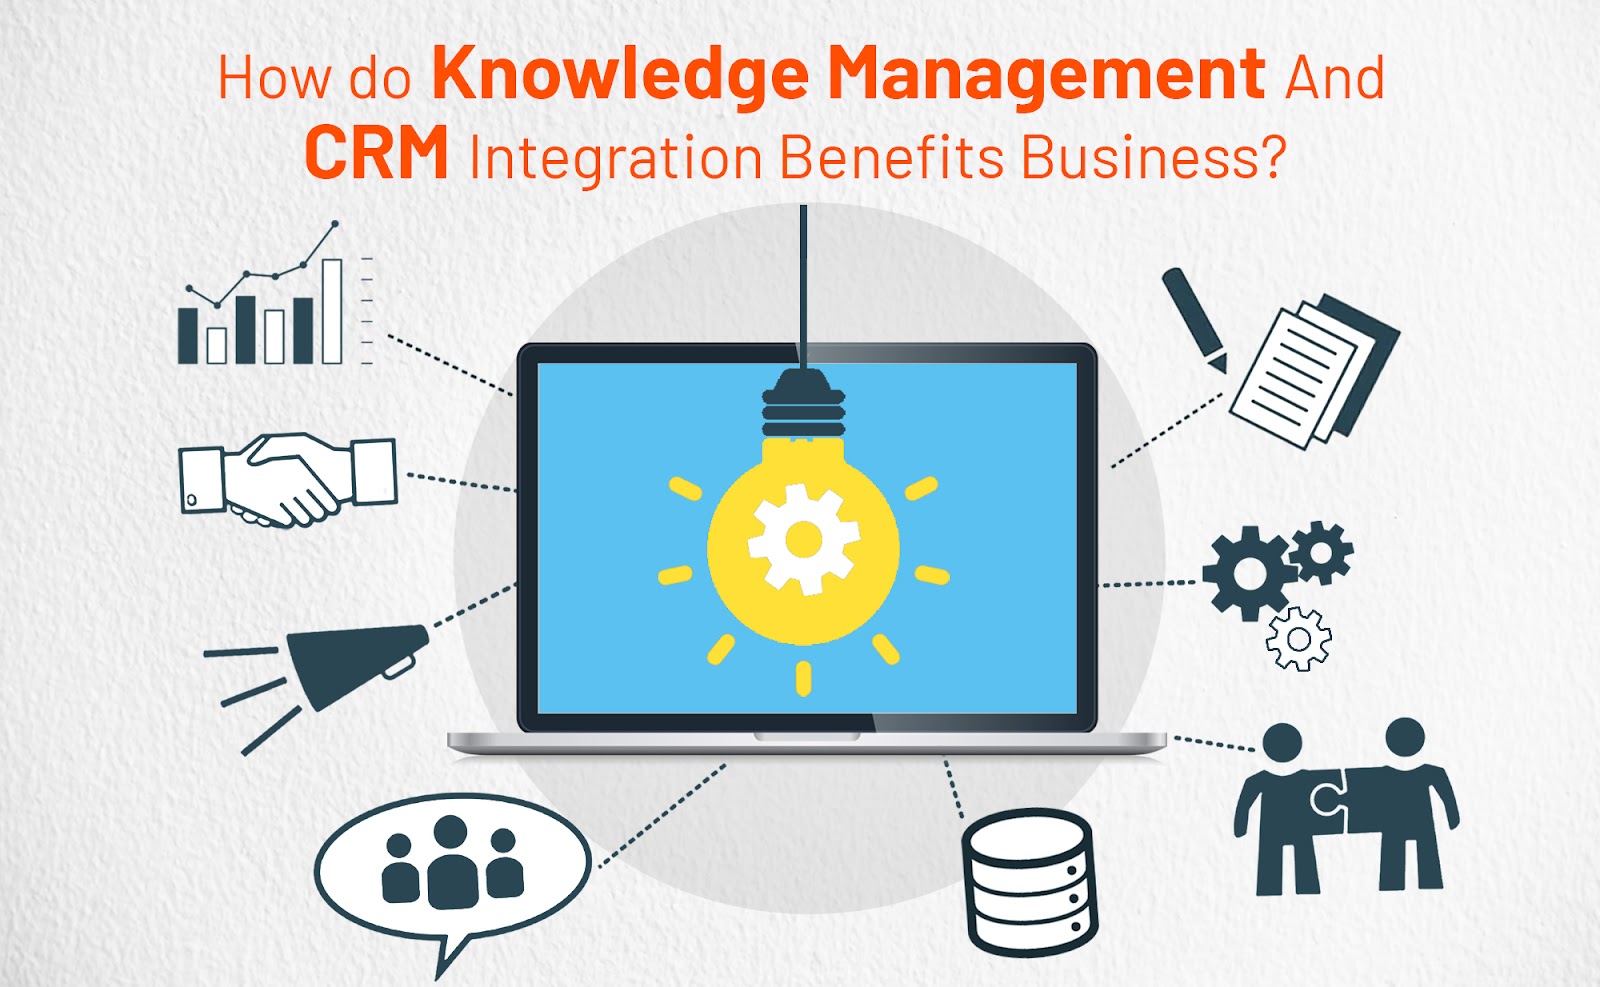 How do Knowledge Management and CRM integration benefits businesses?